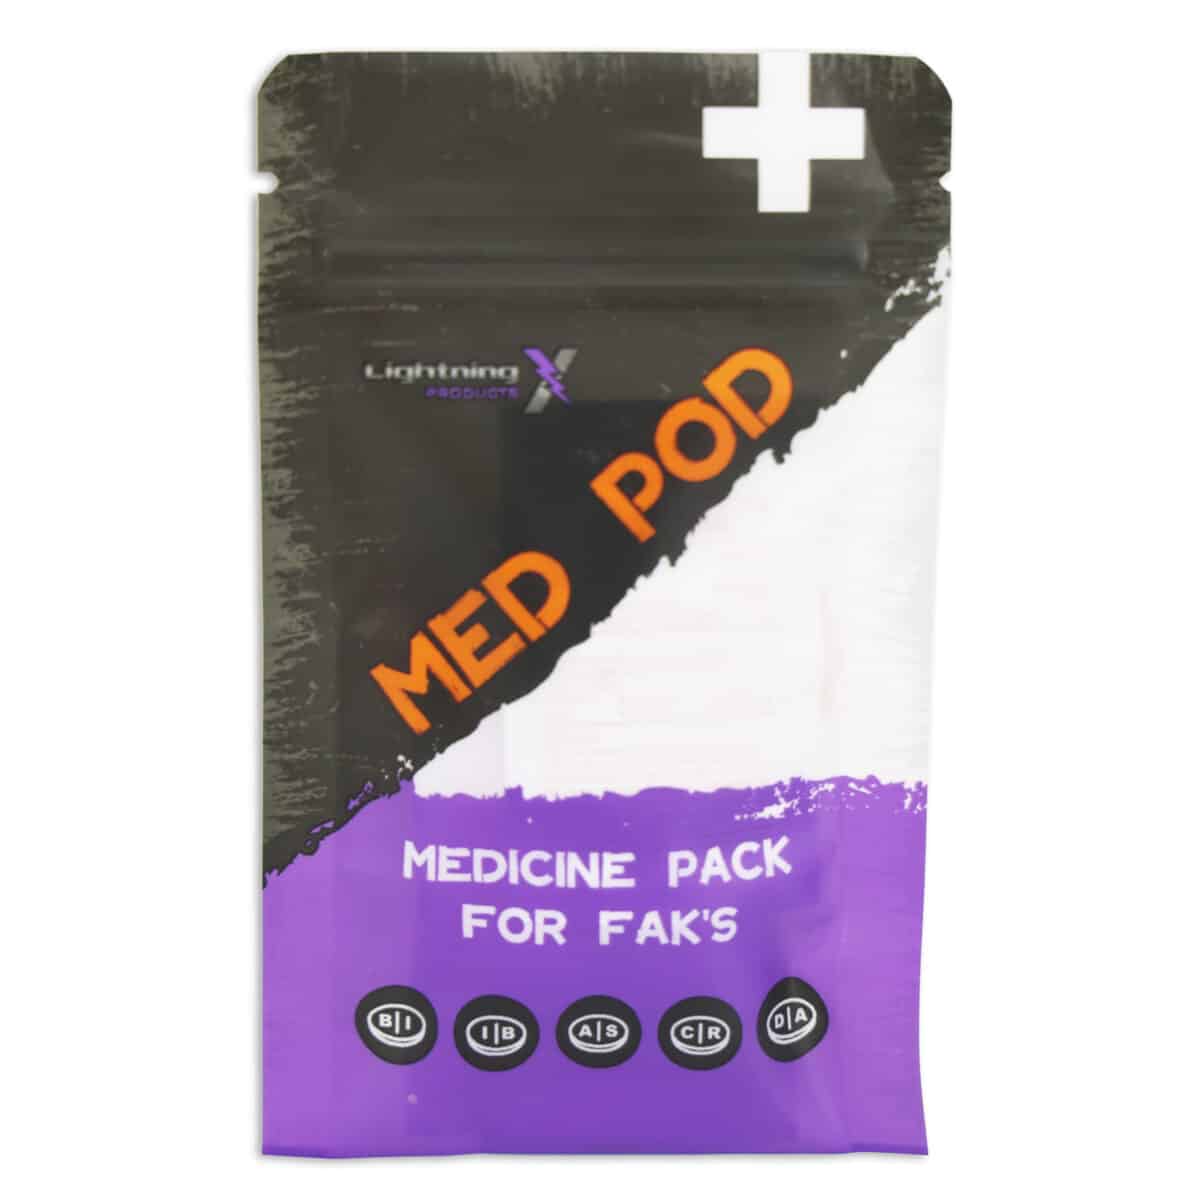 Lightning X Med Pod OTC Meds Over The Counter Medicine Refill Pack for First Aid Kits Includes Aspirin, Ibuprofen, Diotame, Diphen & Multi Symptom Cold Relief